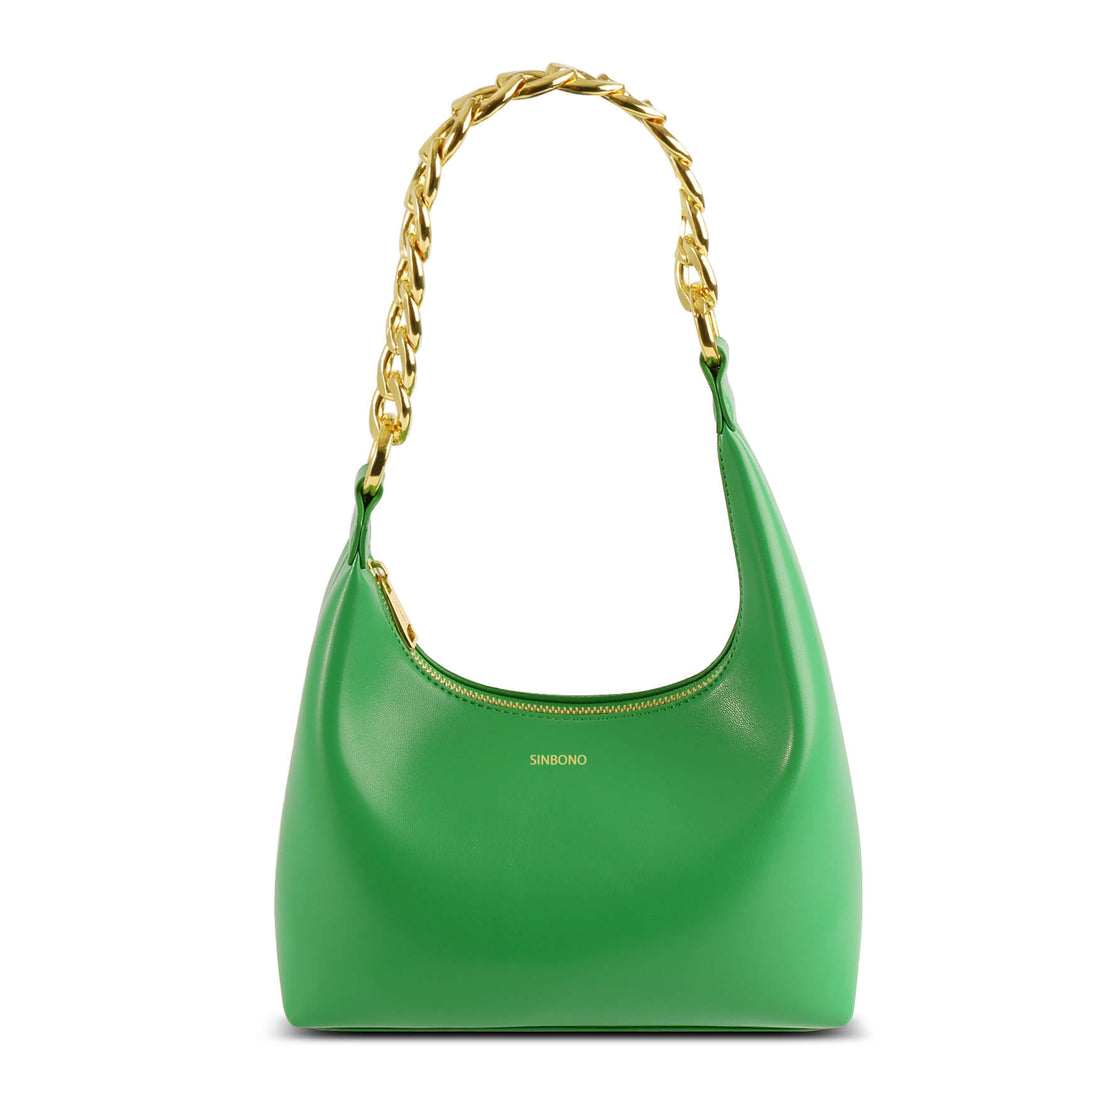 SINBONO Grass Green Shoulder Bags-Crafted from Faux Leather Bag